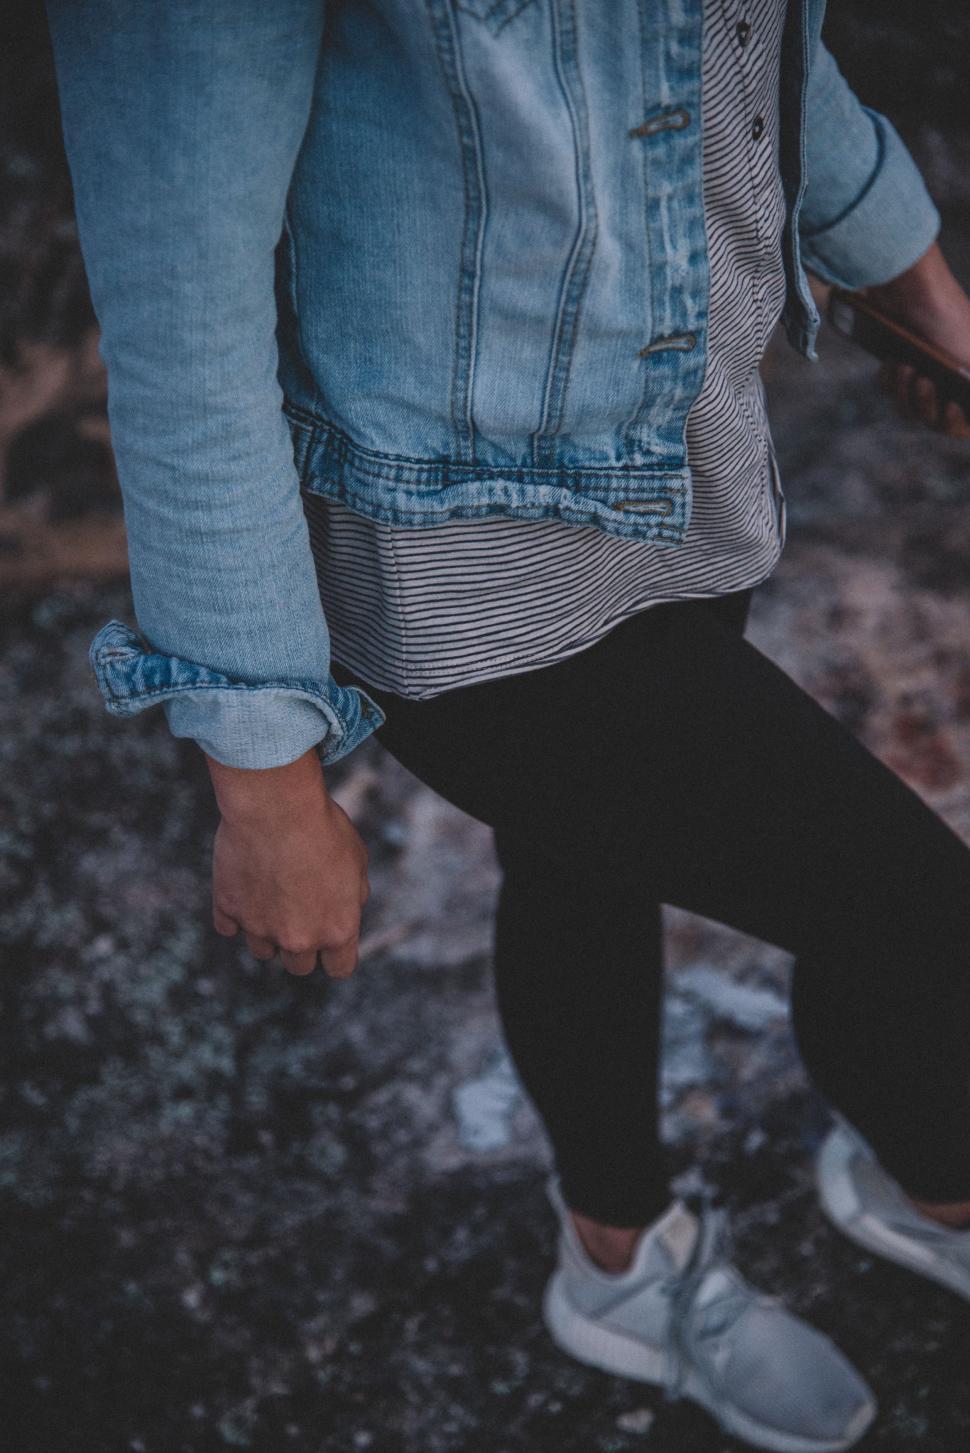 Free Image of Person Wearing a Jean Jacket and Black Pants 